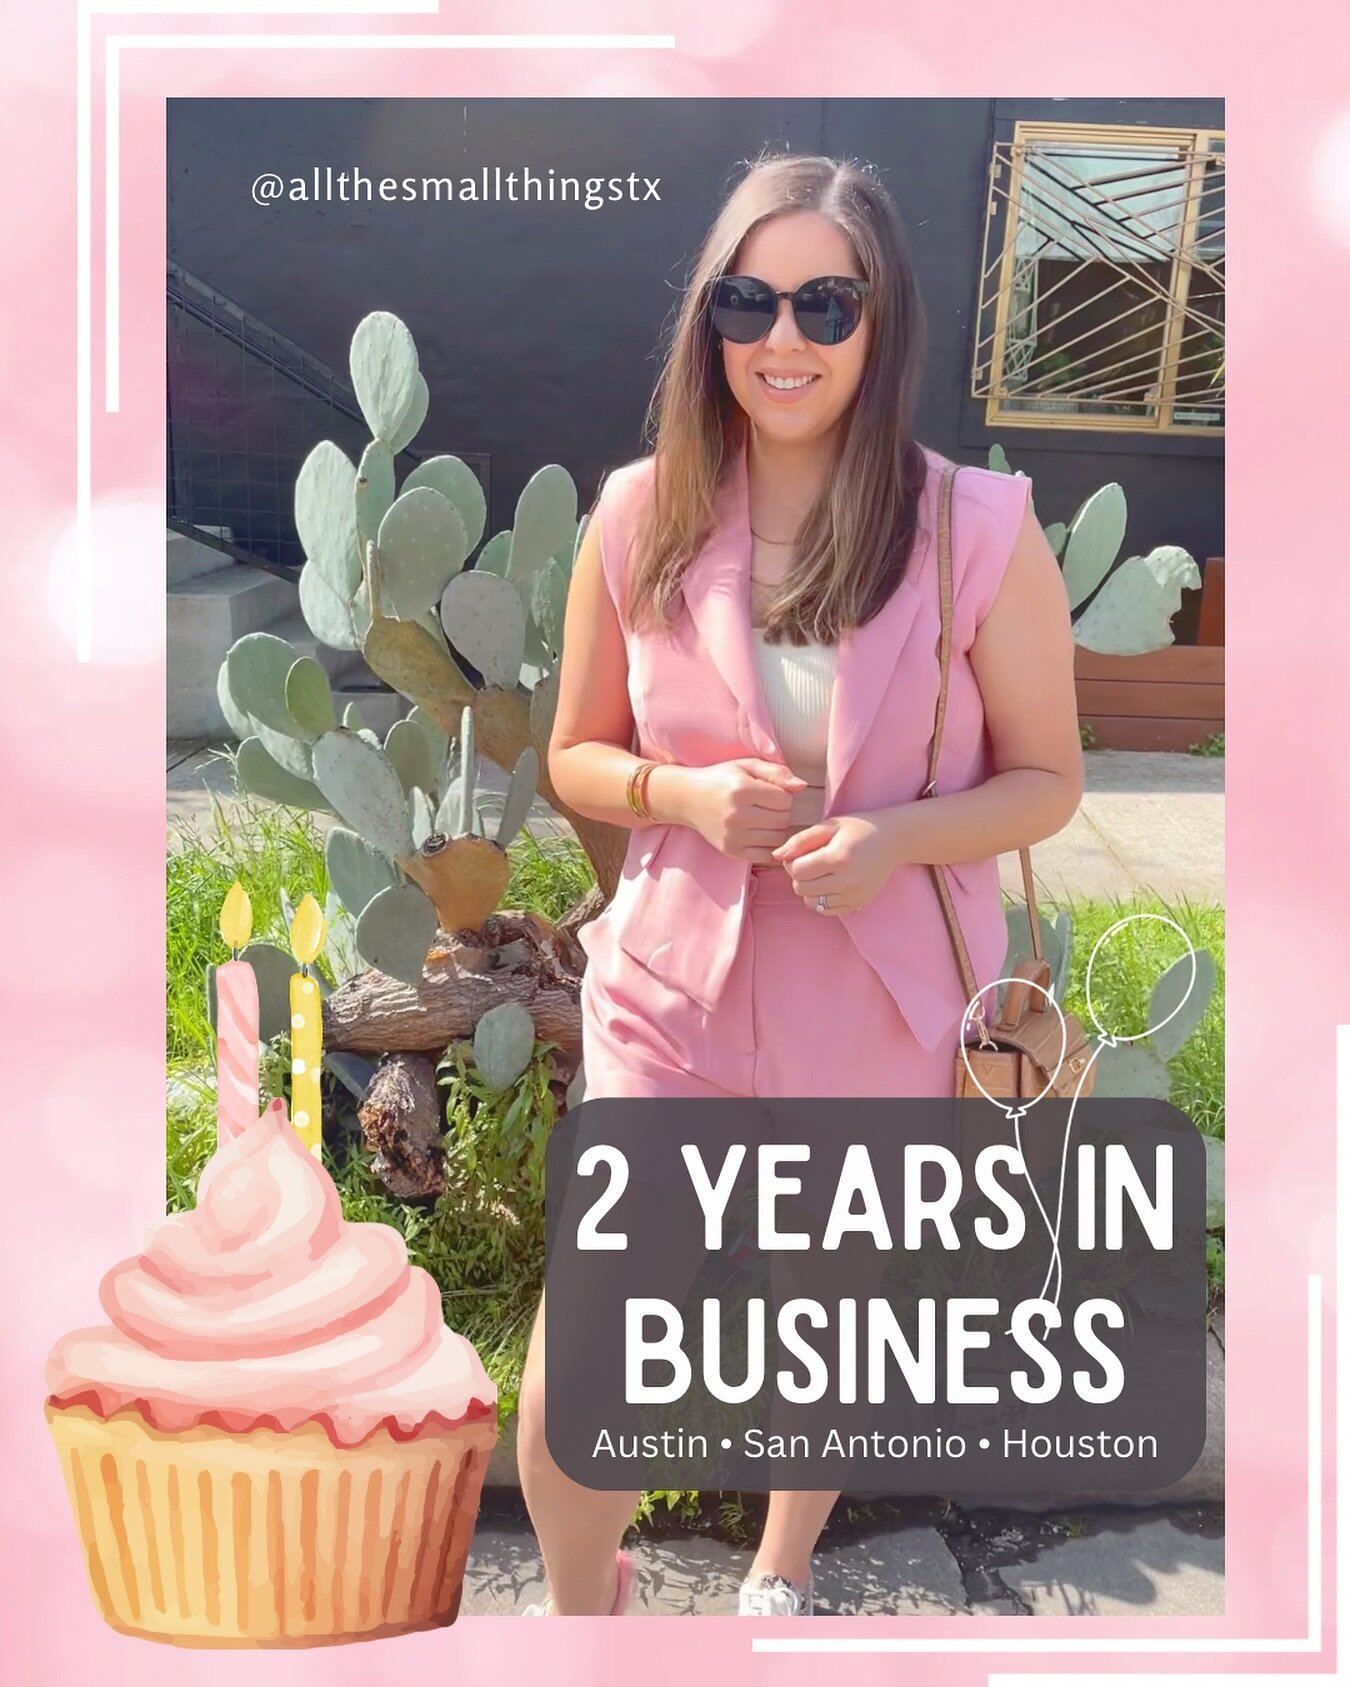 Happy 2nd Birthday to @allthesmallthingstx !! I wake up everyday excited to help others and enjoy life as a mom of two young kiddos (3.5 and 1.5). We have the best clients, the best teammates, and the best service. I&rsquo;m so proud of my past self 